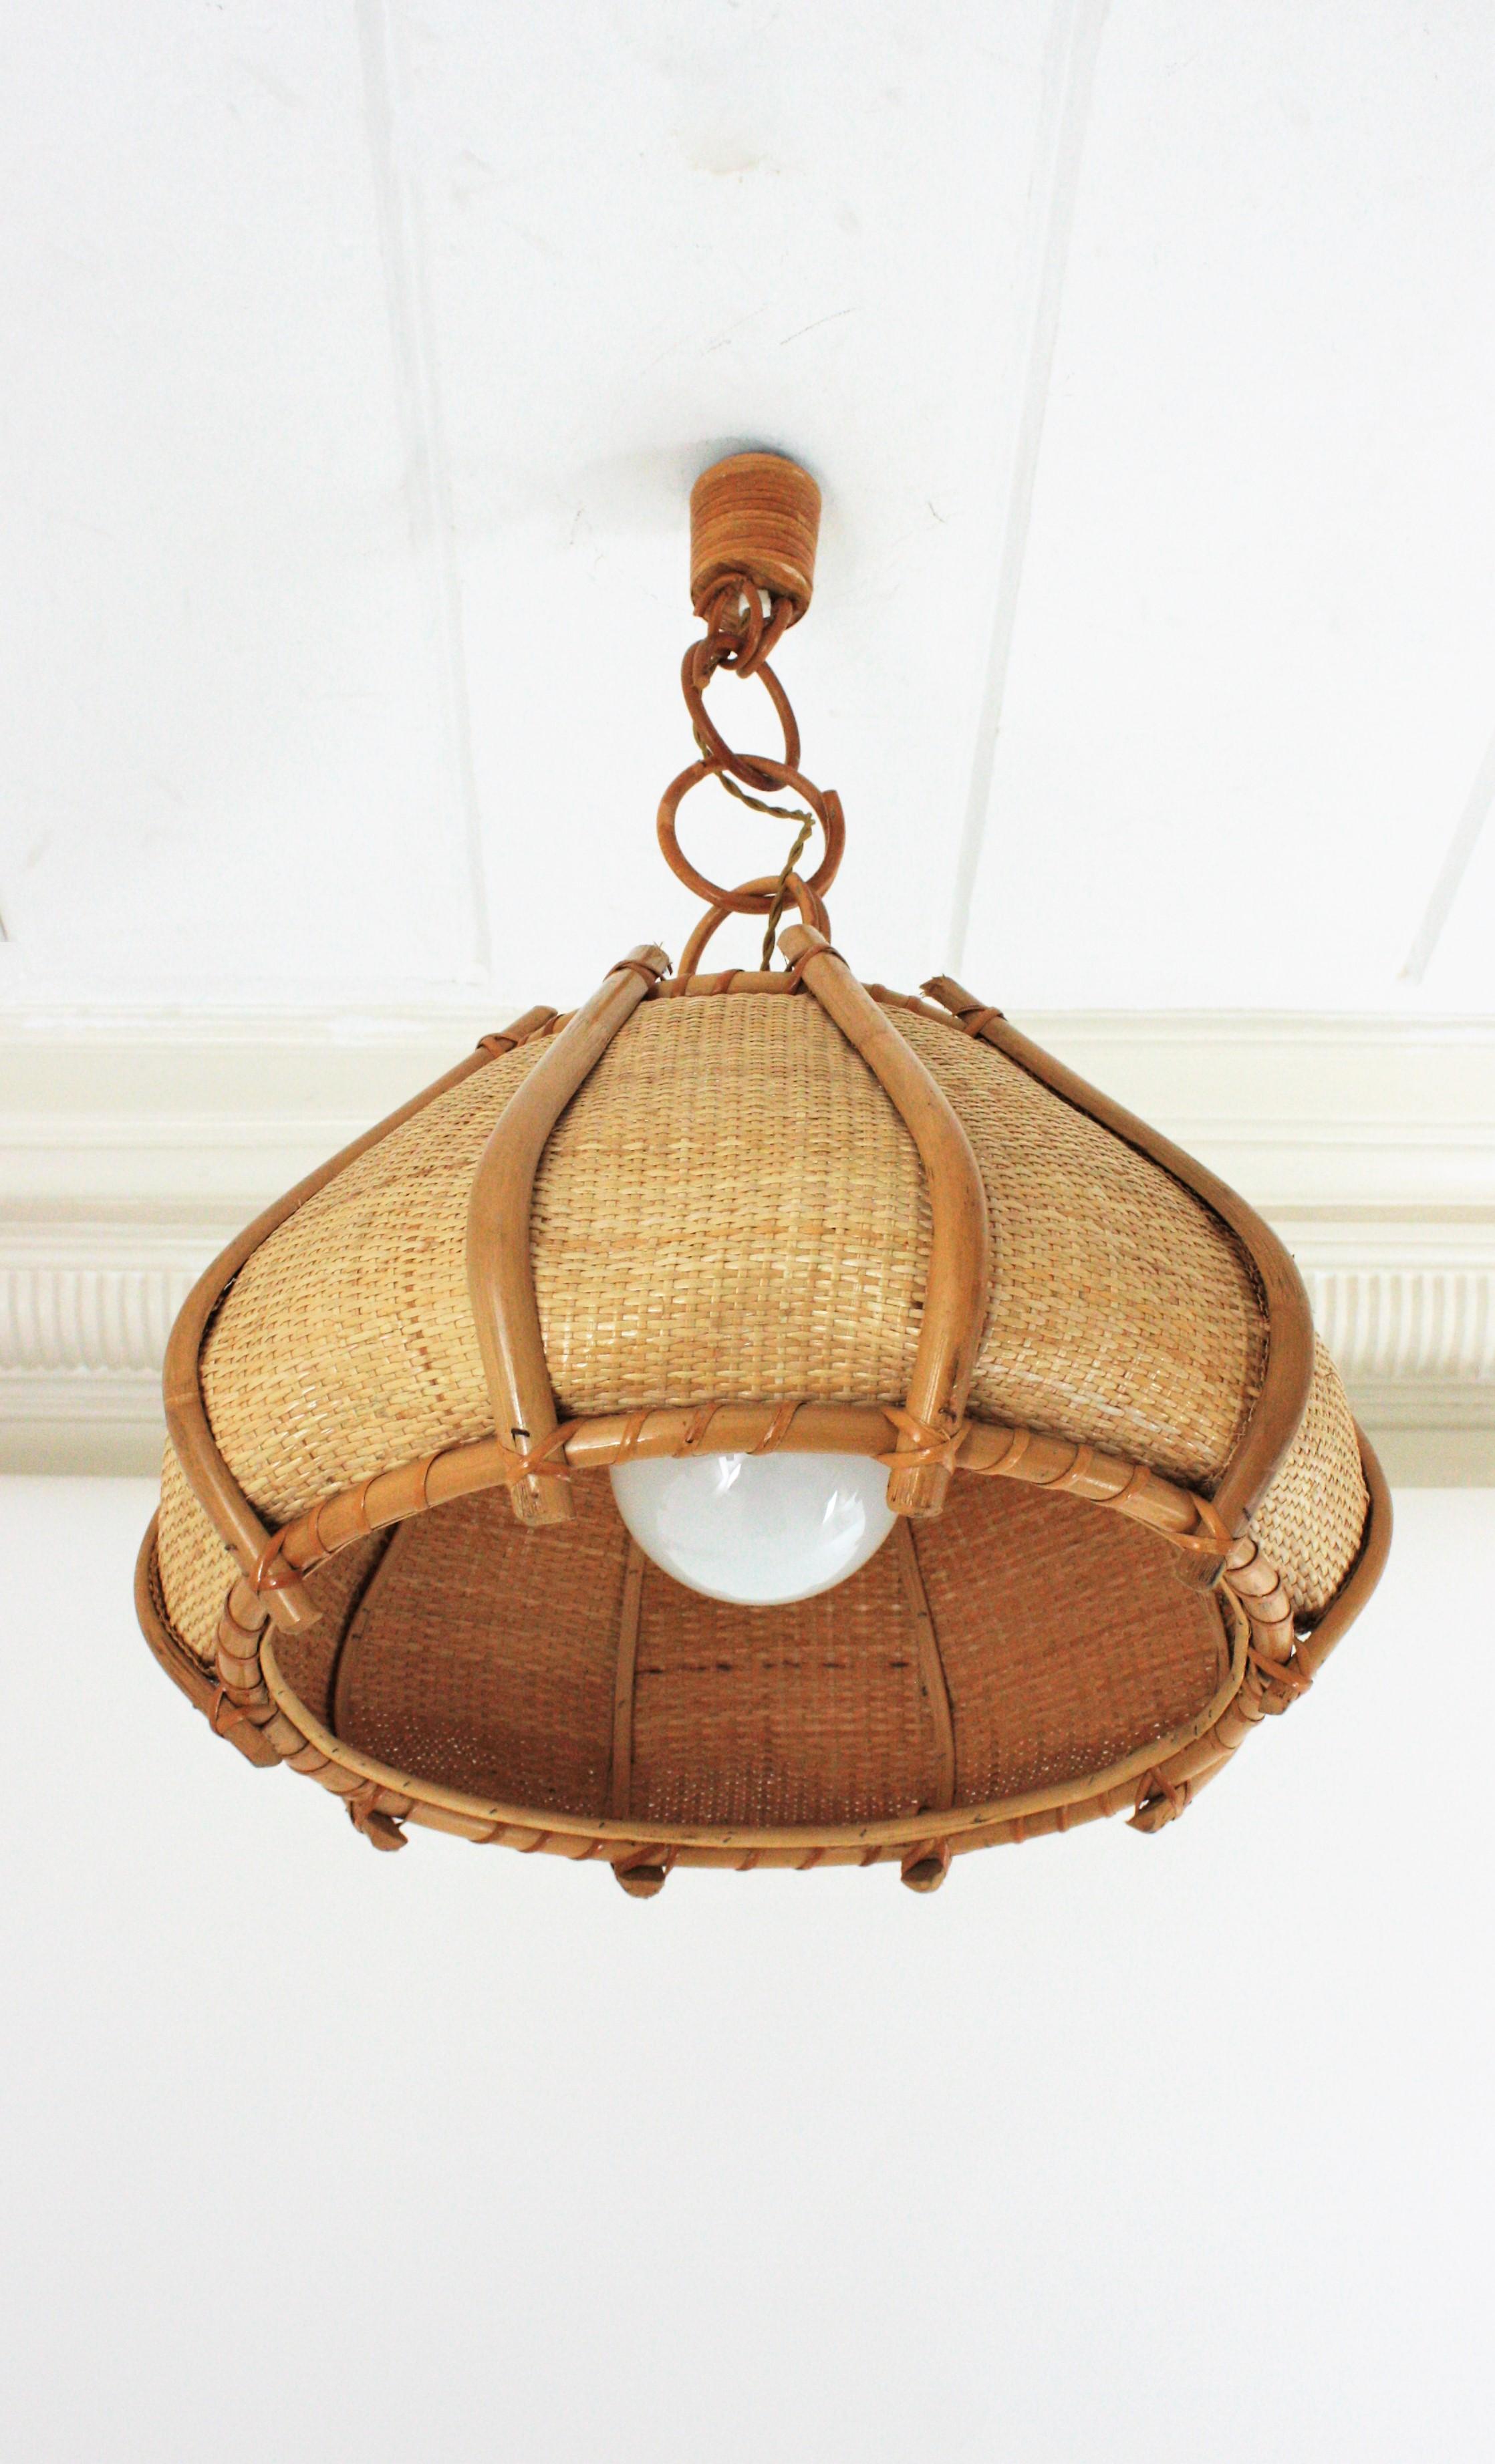 Mid-Century Modern woven wicker and bamboo large bell pendant / hanging light. Spain, 1960s.
This beautiful suspension lamp features a bamboo and wicker wire bell shaped shade with bamboo decorative vertical bars. It hangs from a chain with large